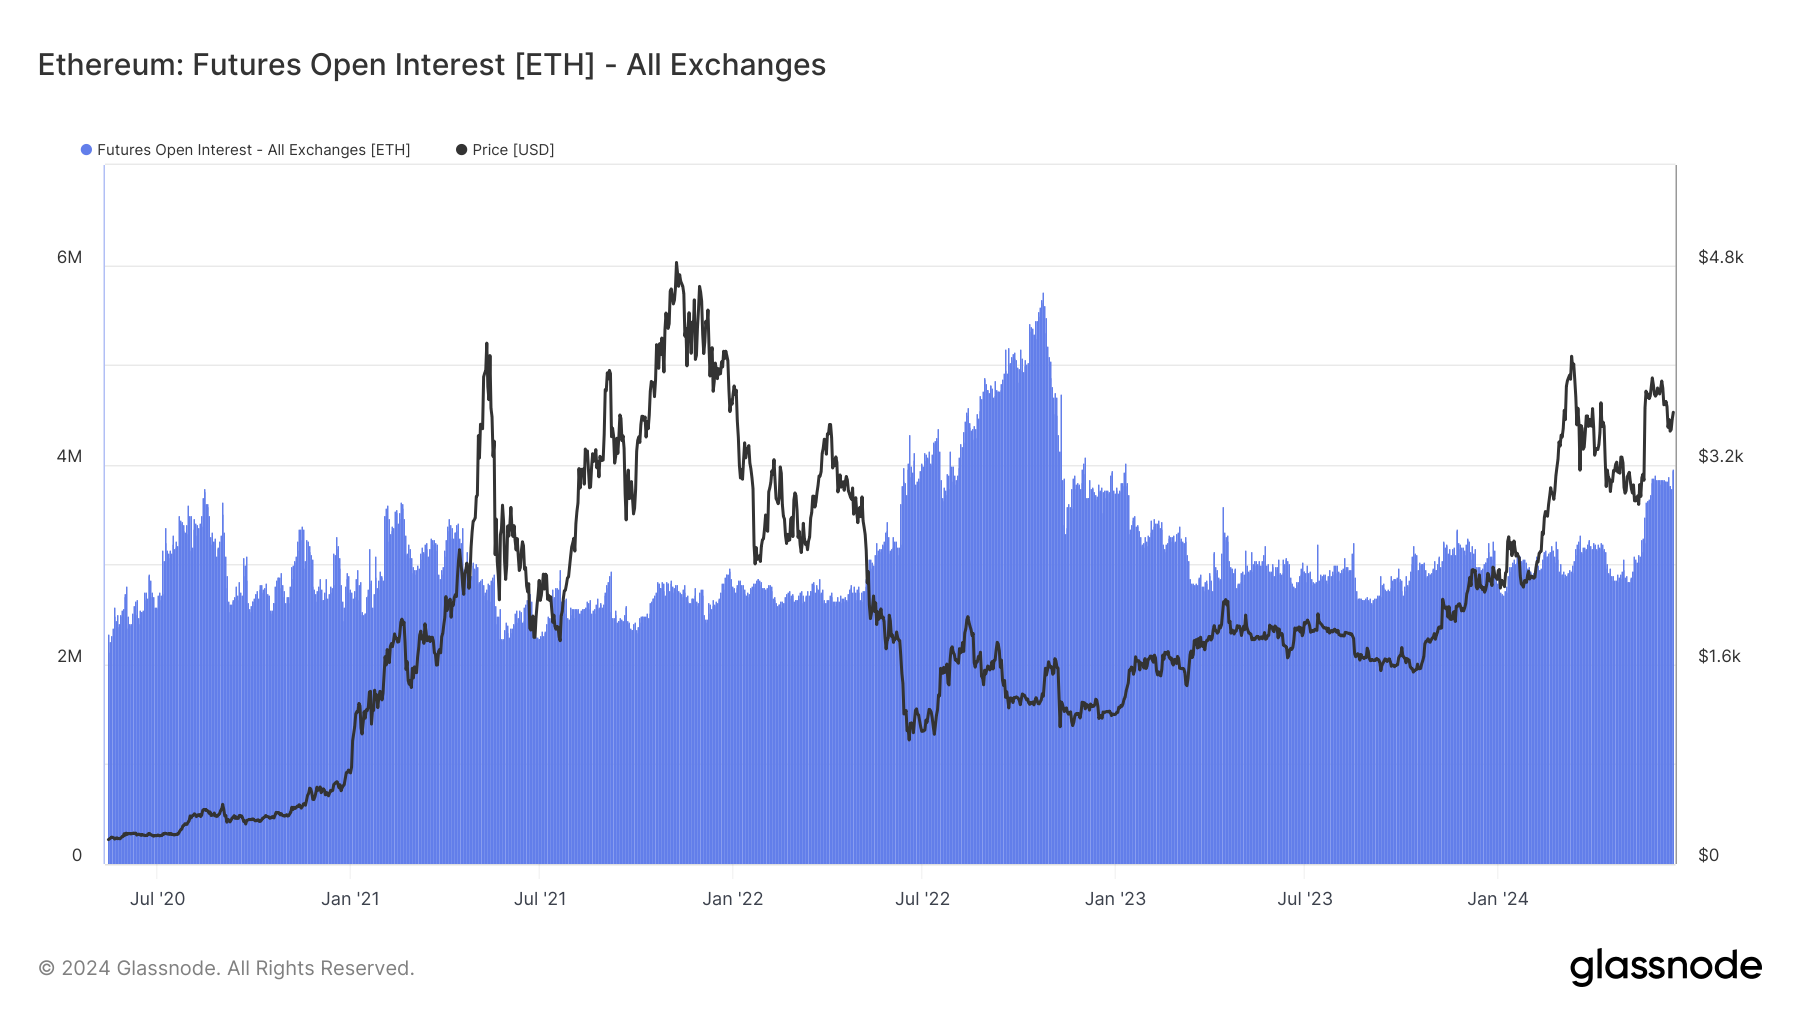 Rising Ethereum futures open interest highlights impact of SEC’s ETF approval